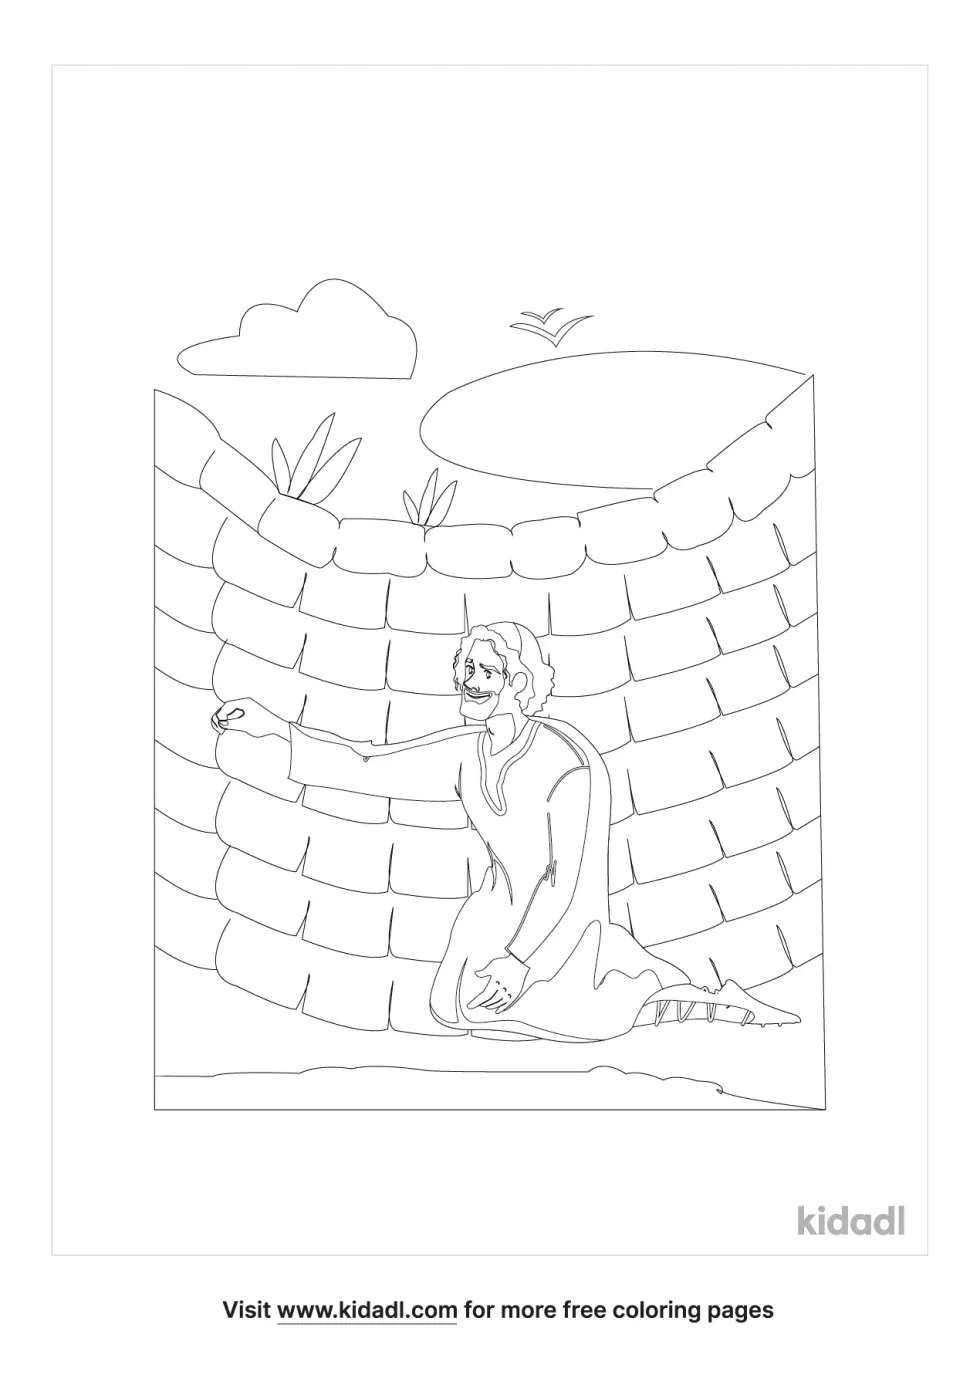 Joseph In The Well Coloring Page